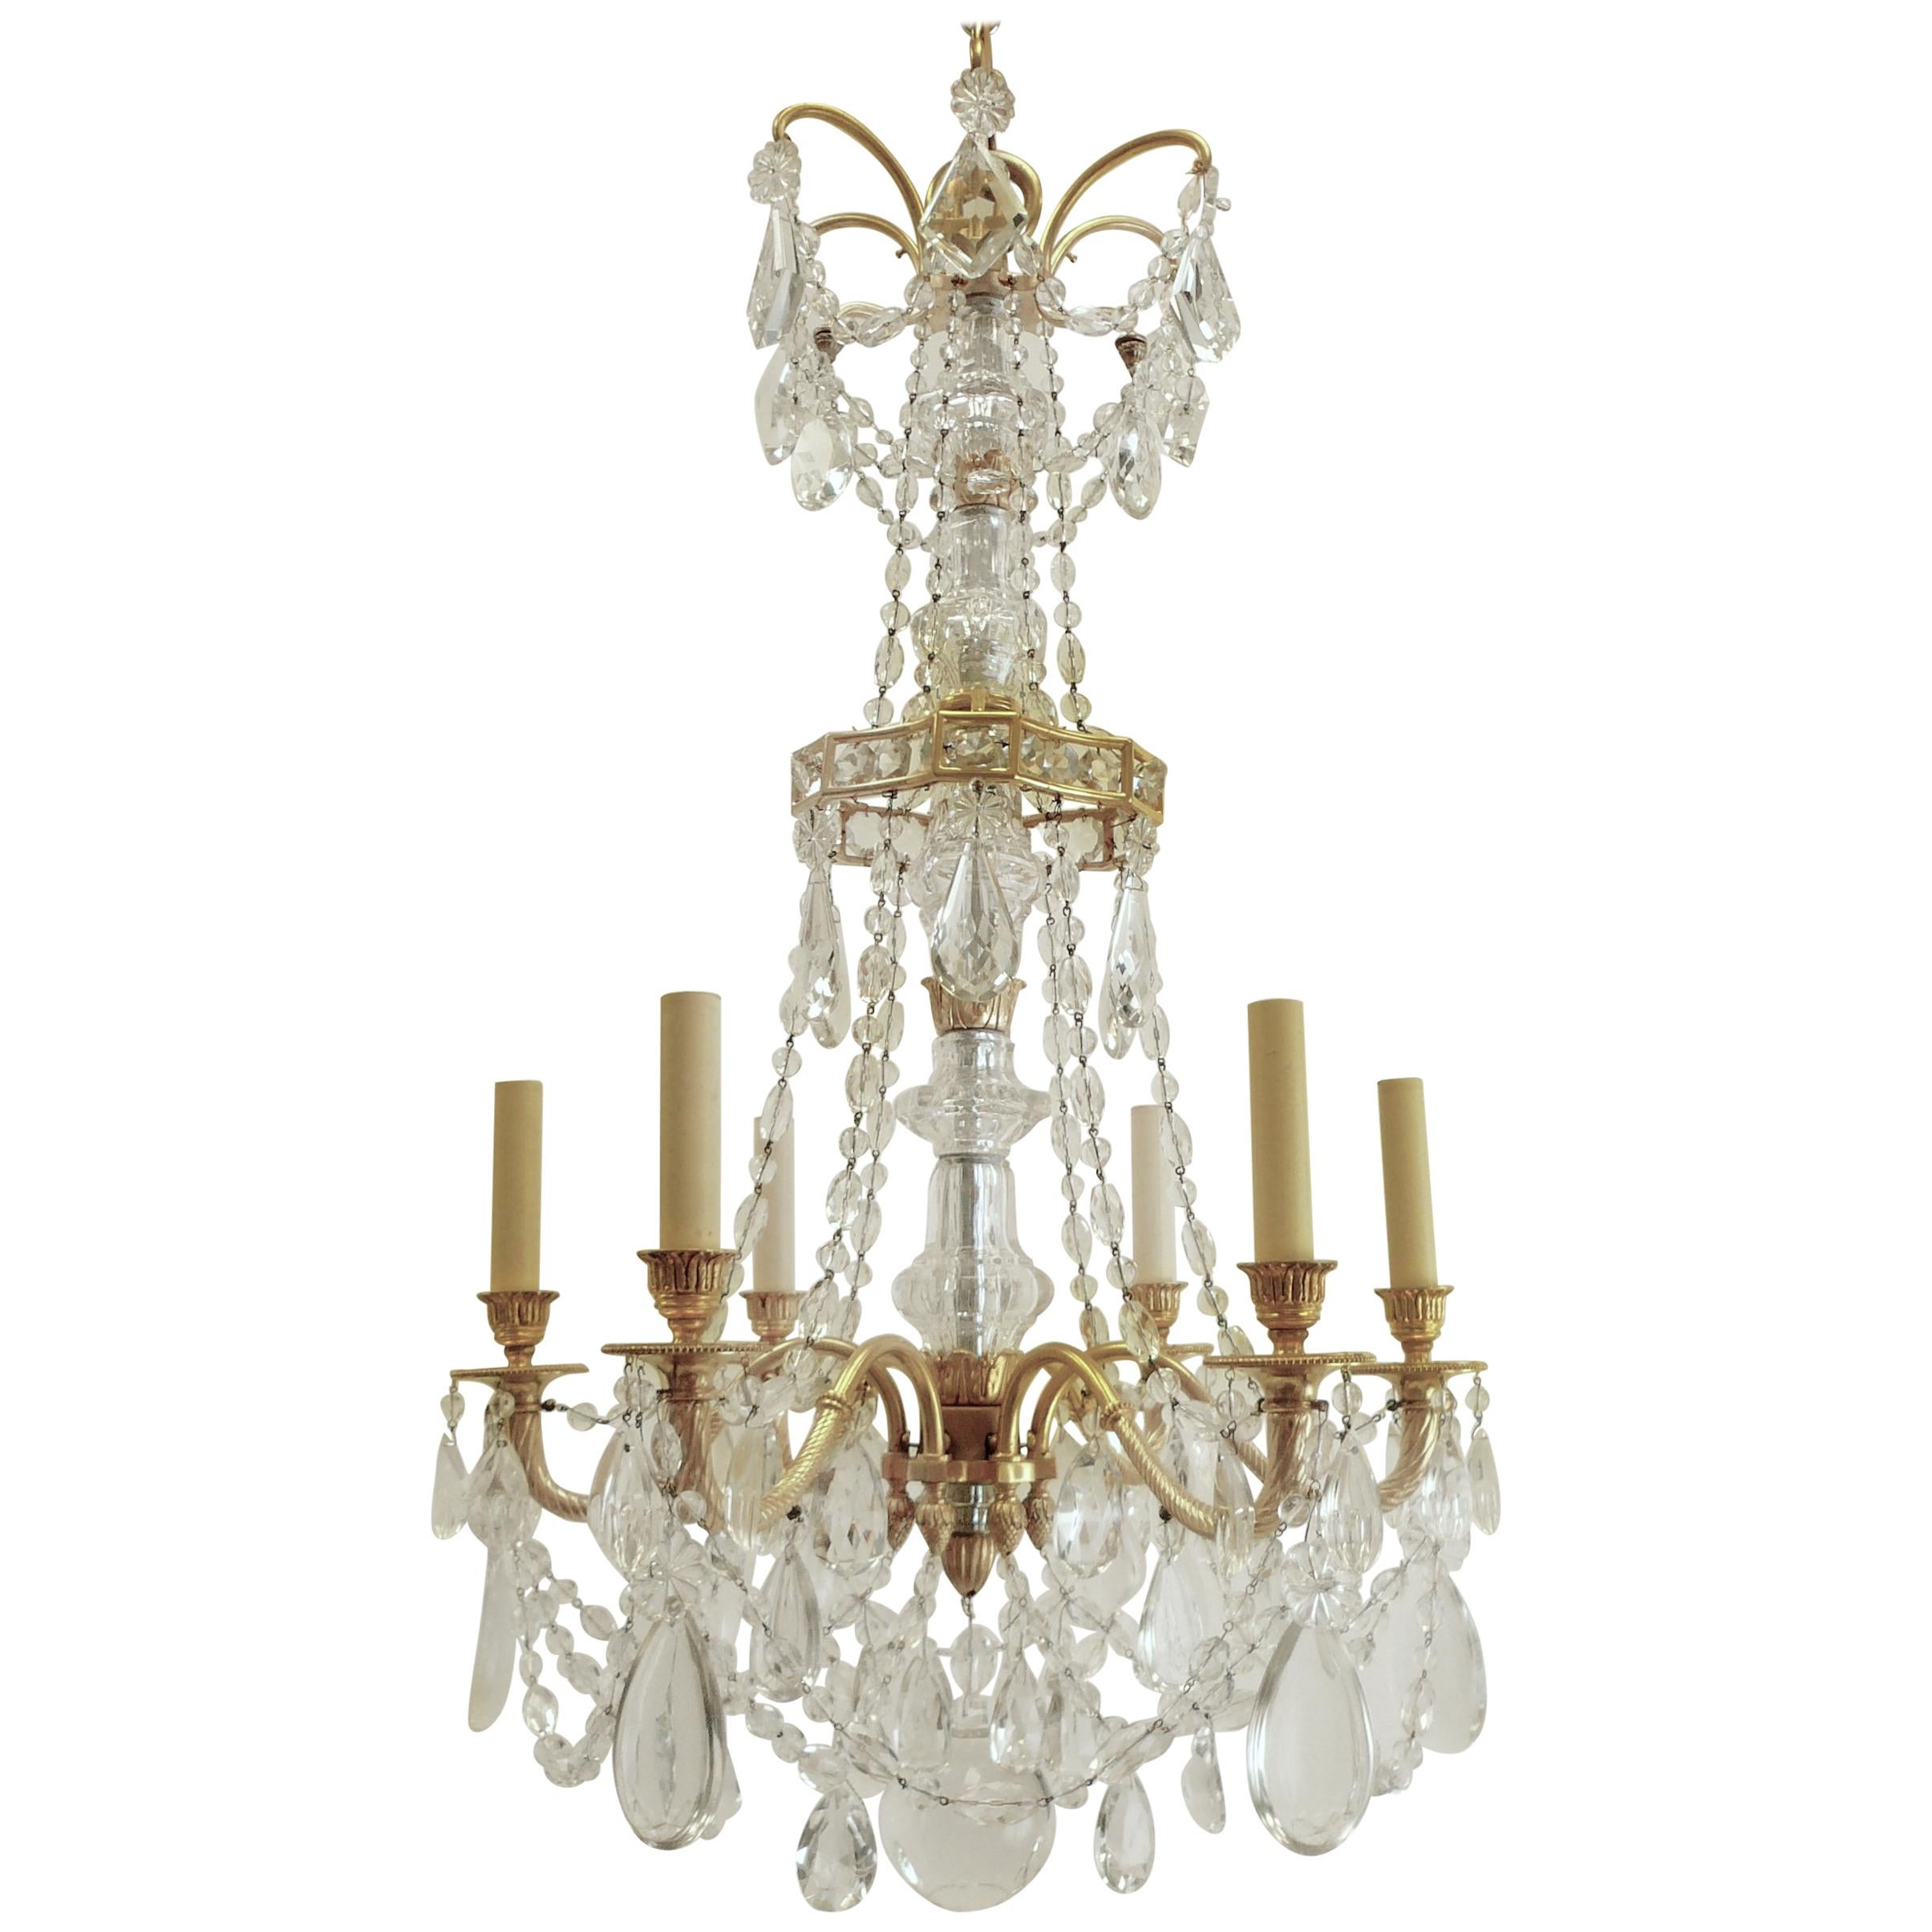 Neoclassical Gilt Bronze and Crystal Chandelier by E. F. Caldwell